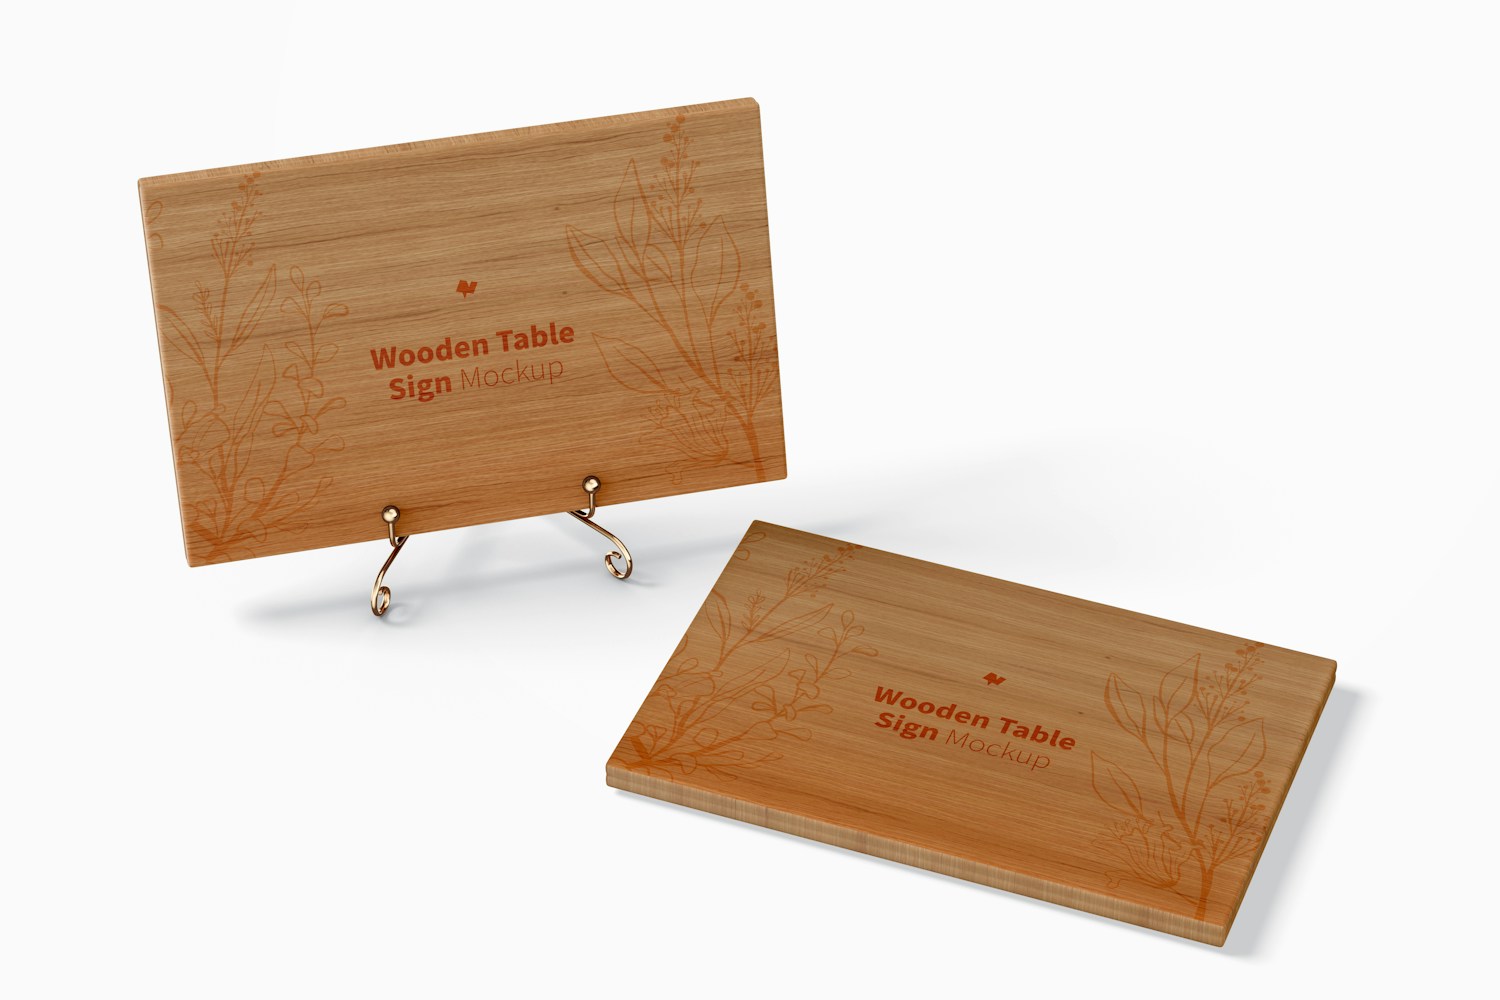 Wooden Table Signs Mockup